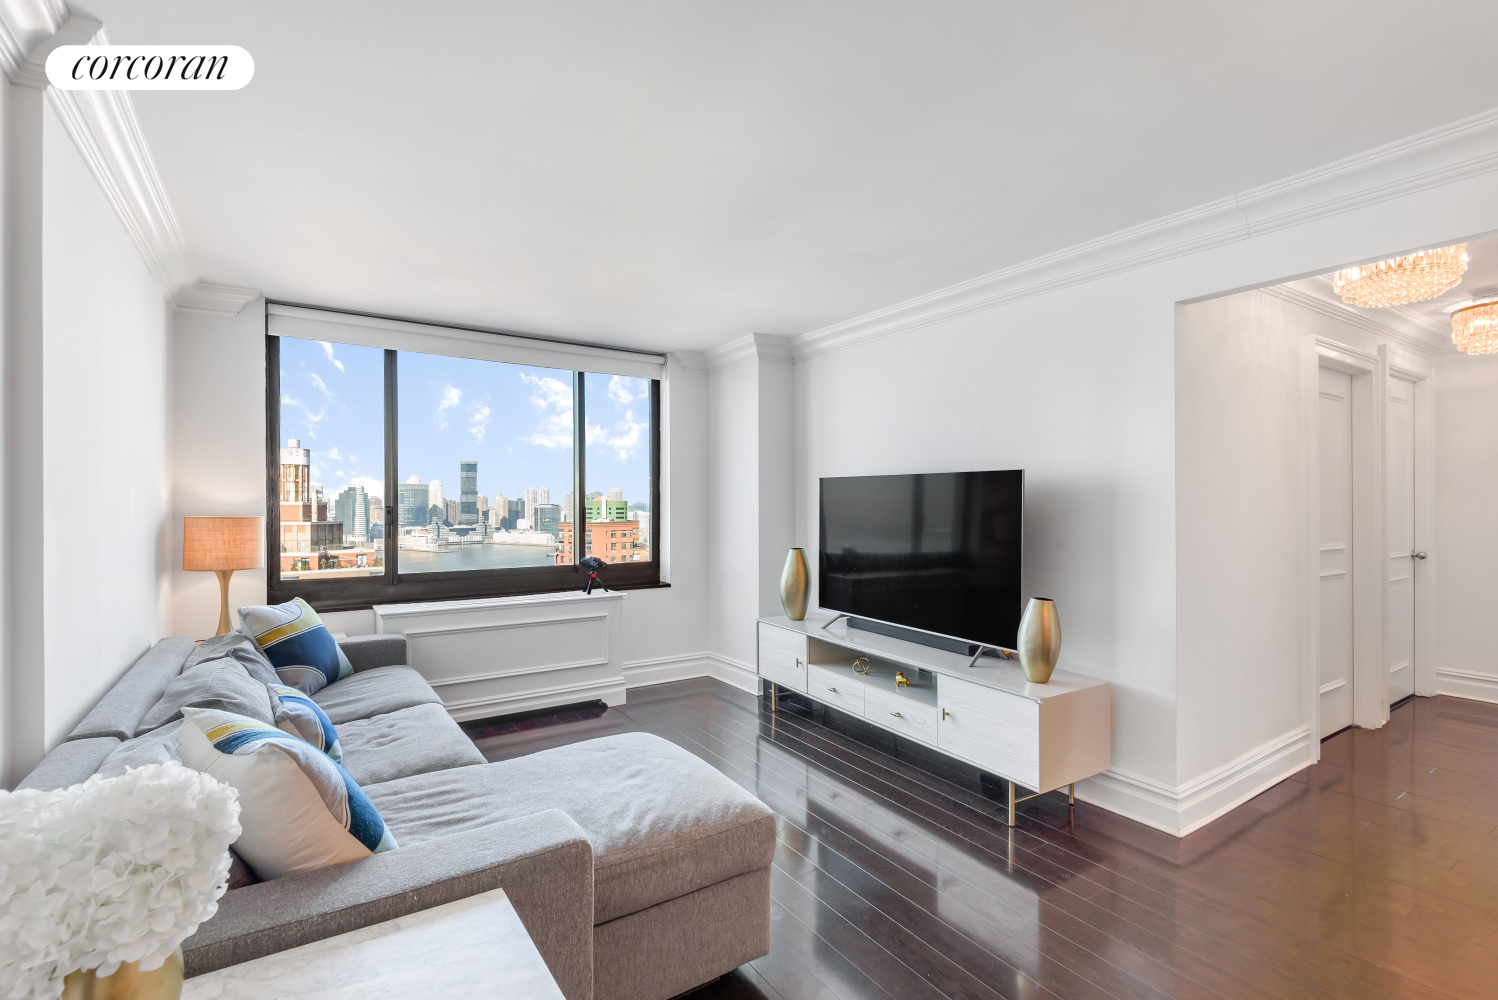 200 Rector Place 32B, Battery Park City, Downtown, NYC - 3 Bedrooms  
2 Bathrooms  
6 Rooms - 